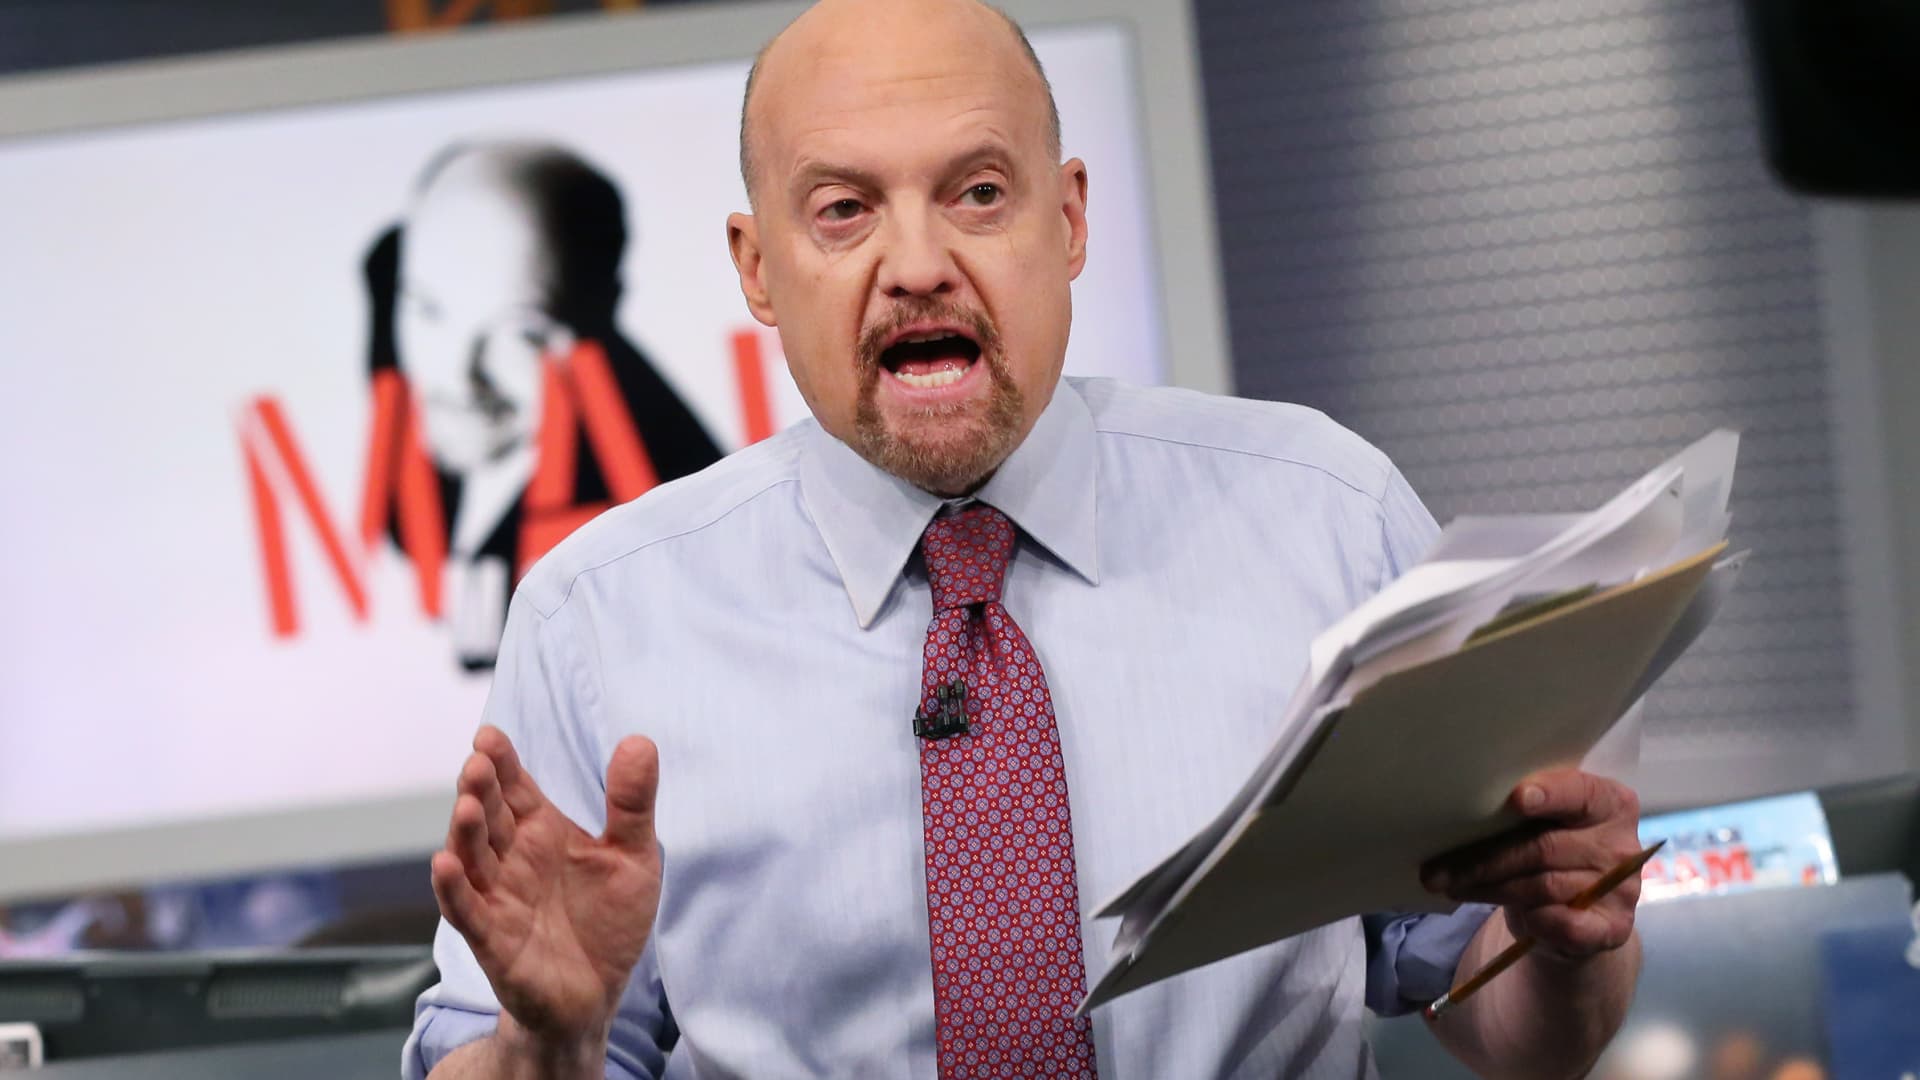 Hedge funds choosing ‘fresh’ stocks over obvious winners drove Thursday’s rally, Jim Cramer says